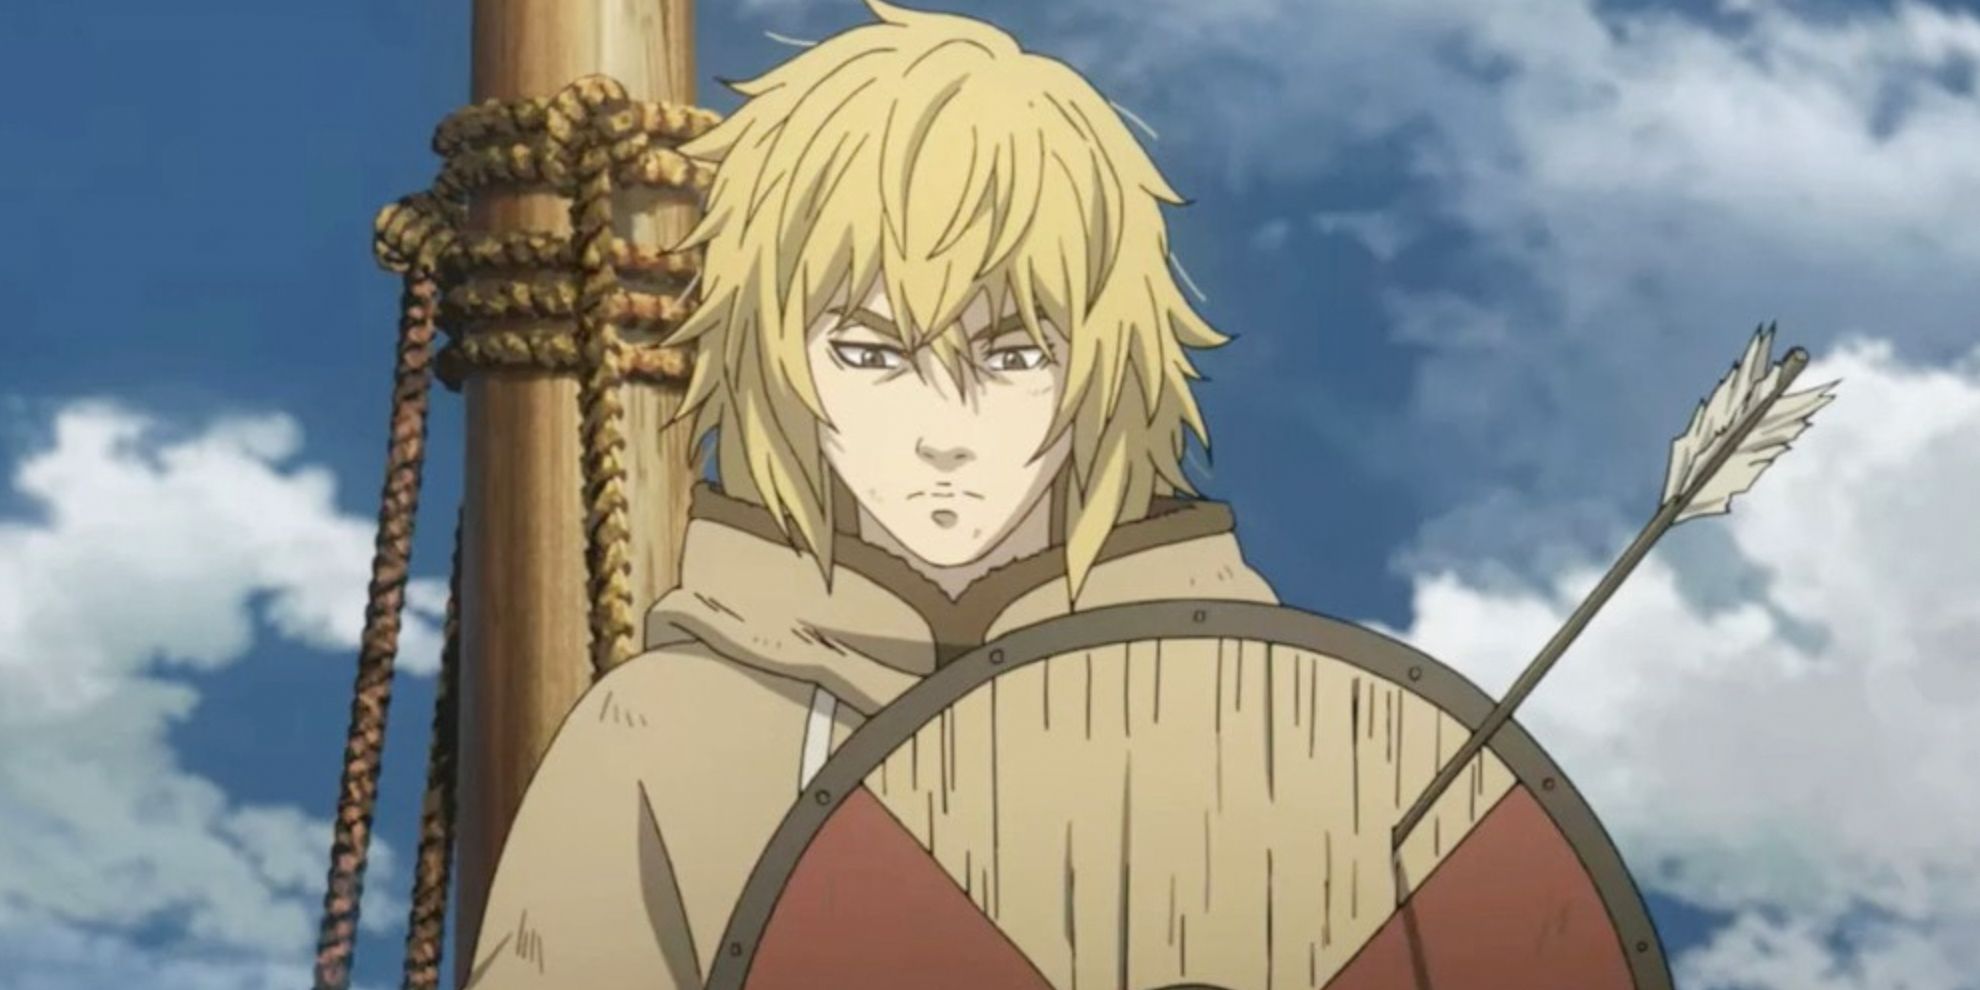 Thorfinn with a shield in front of him in Vinland Saga